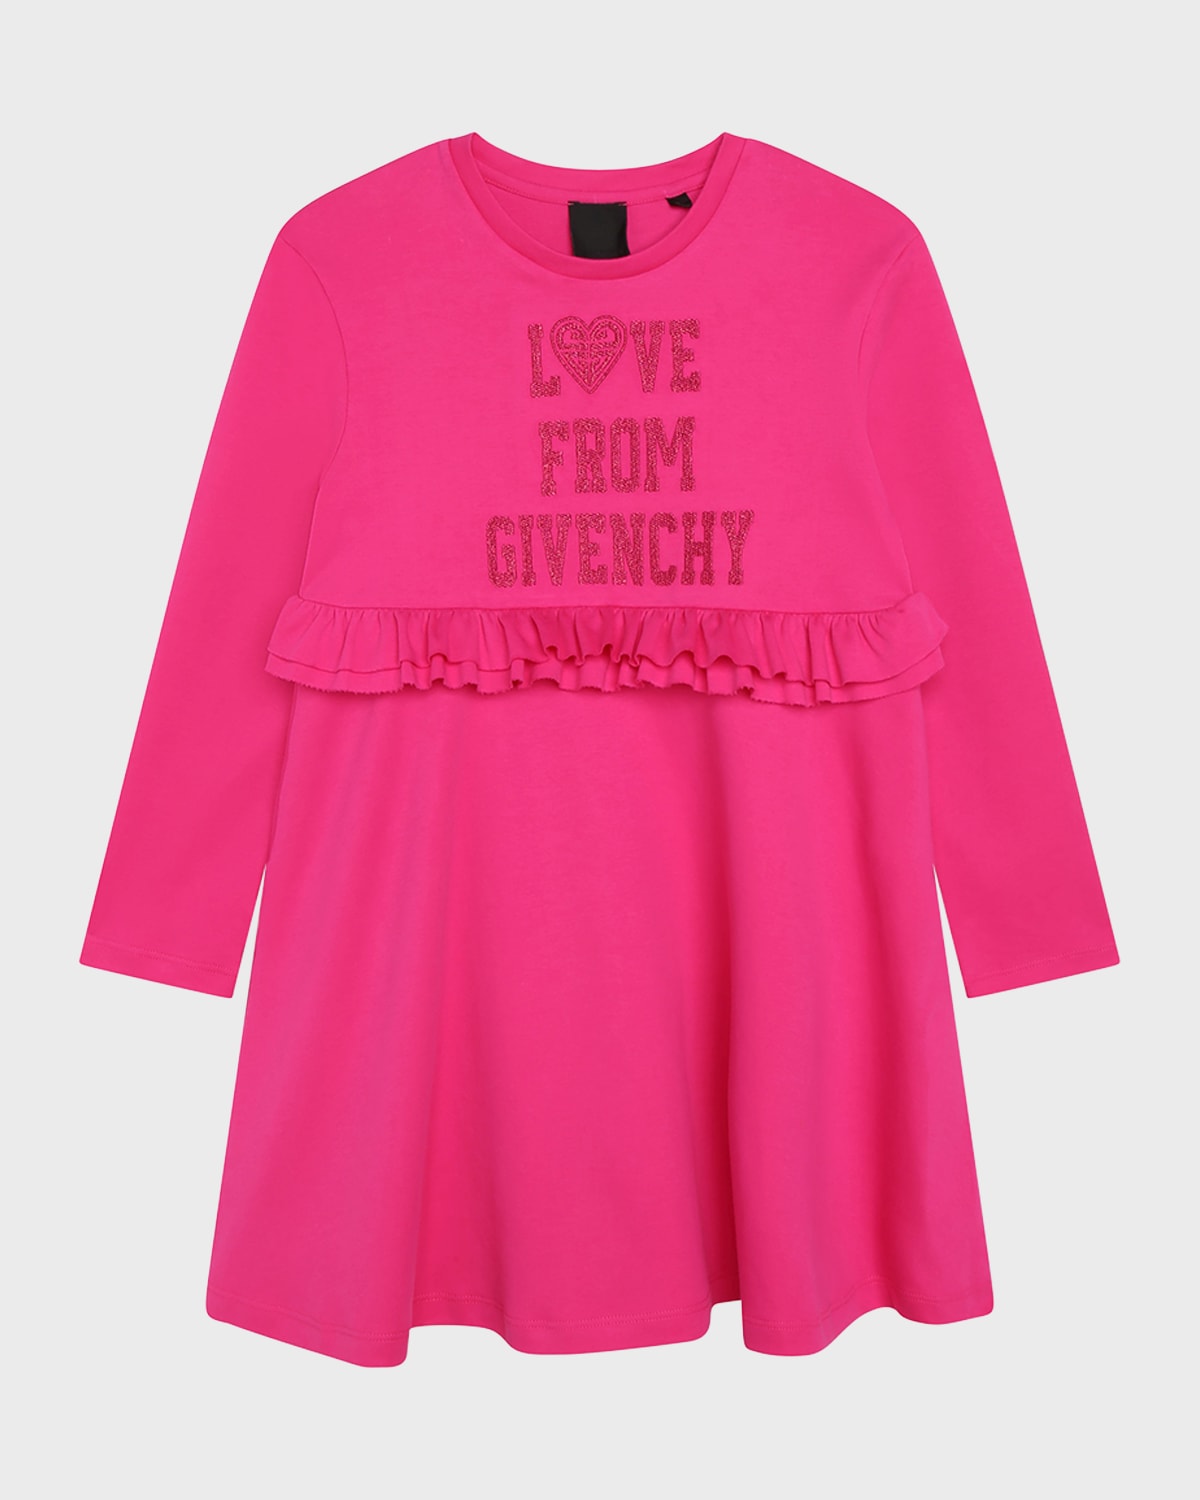 GIVENCHY GIRL'S LOVE FROM GIVENCHY JERSEY DRESS